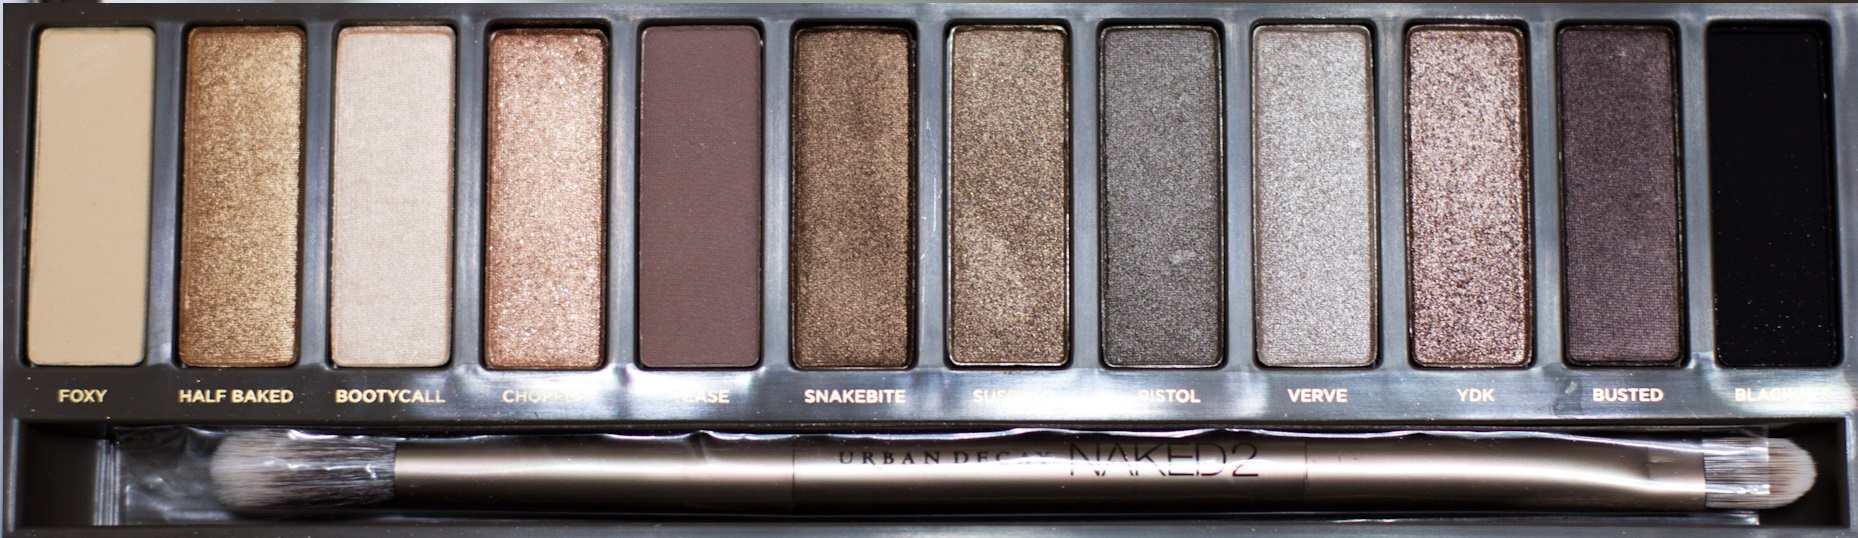 Urban Decay Naked 2 review TheFuss.co.uk